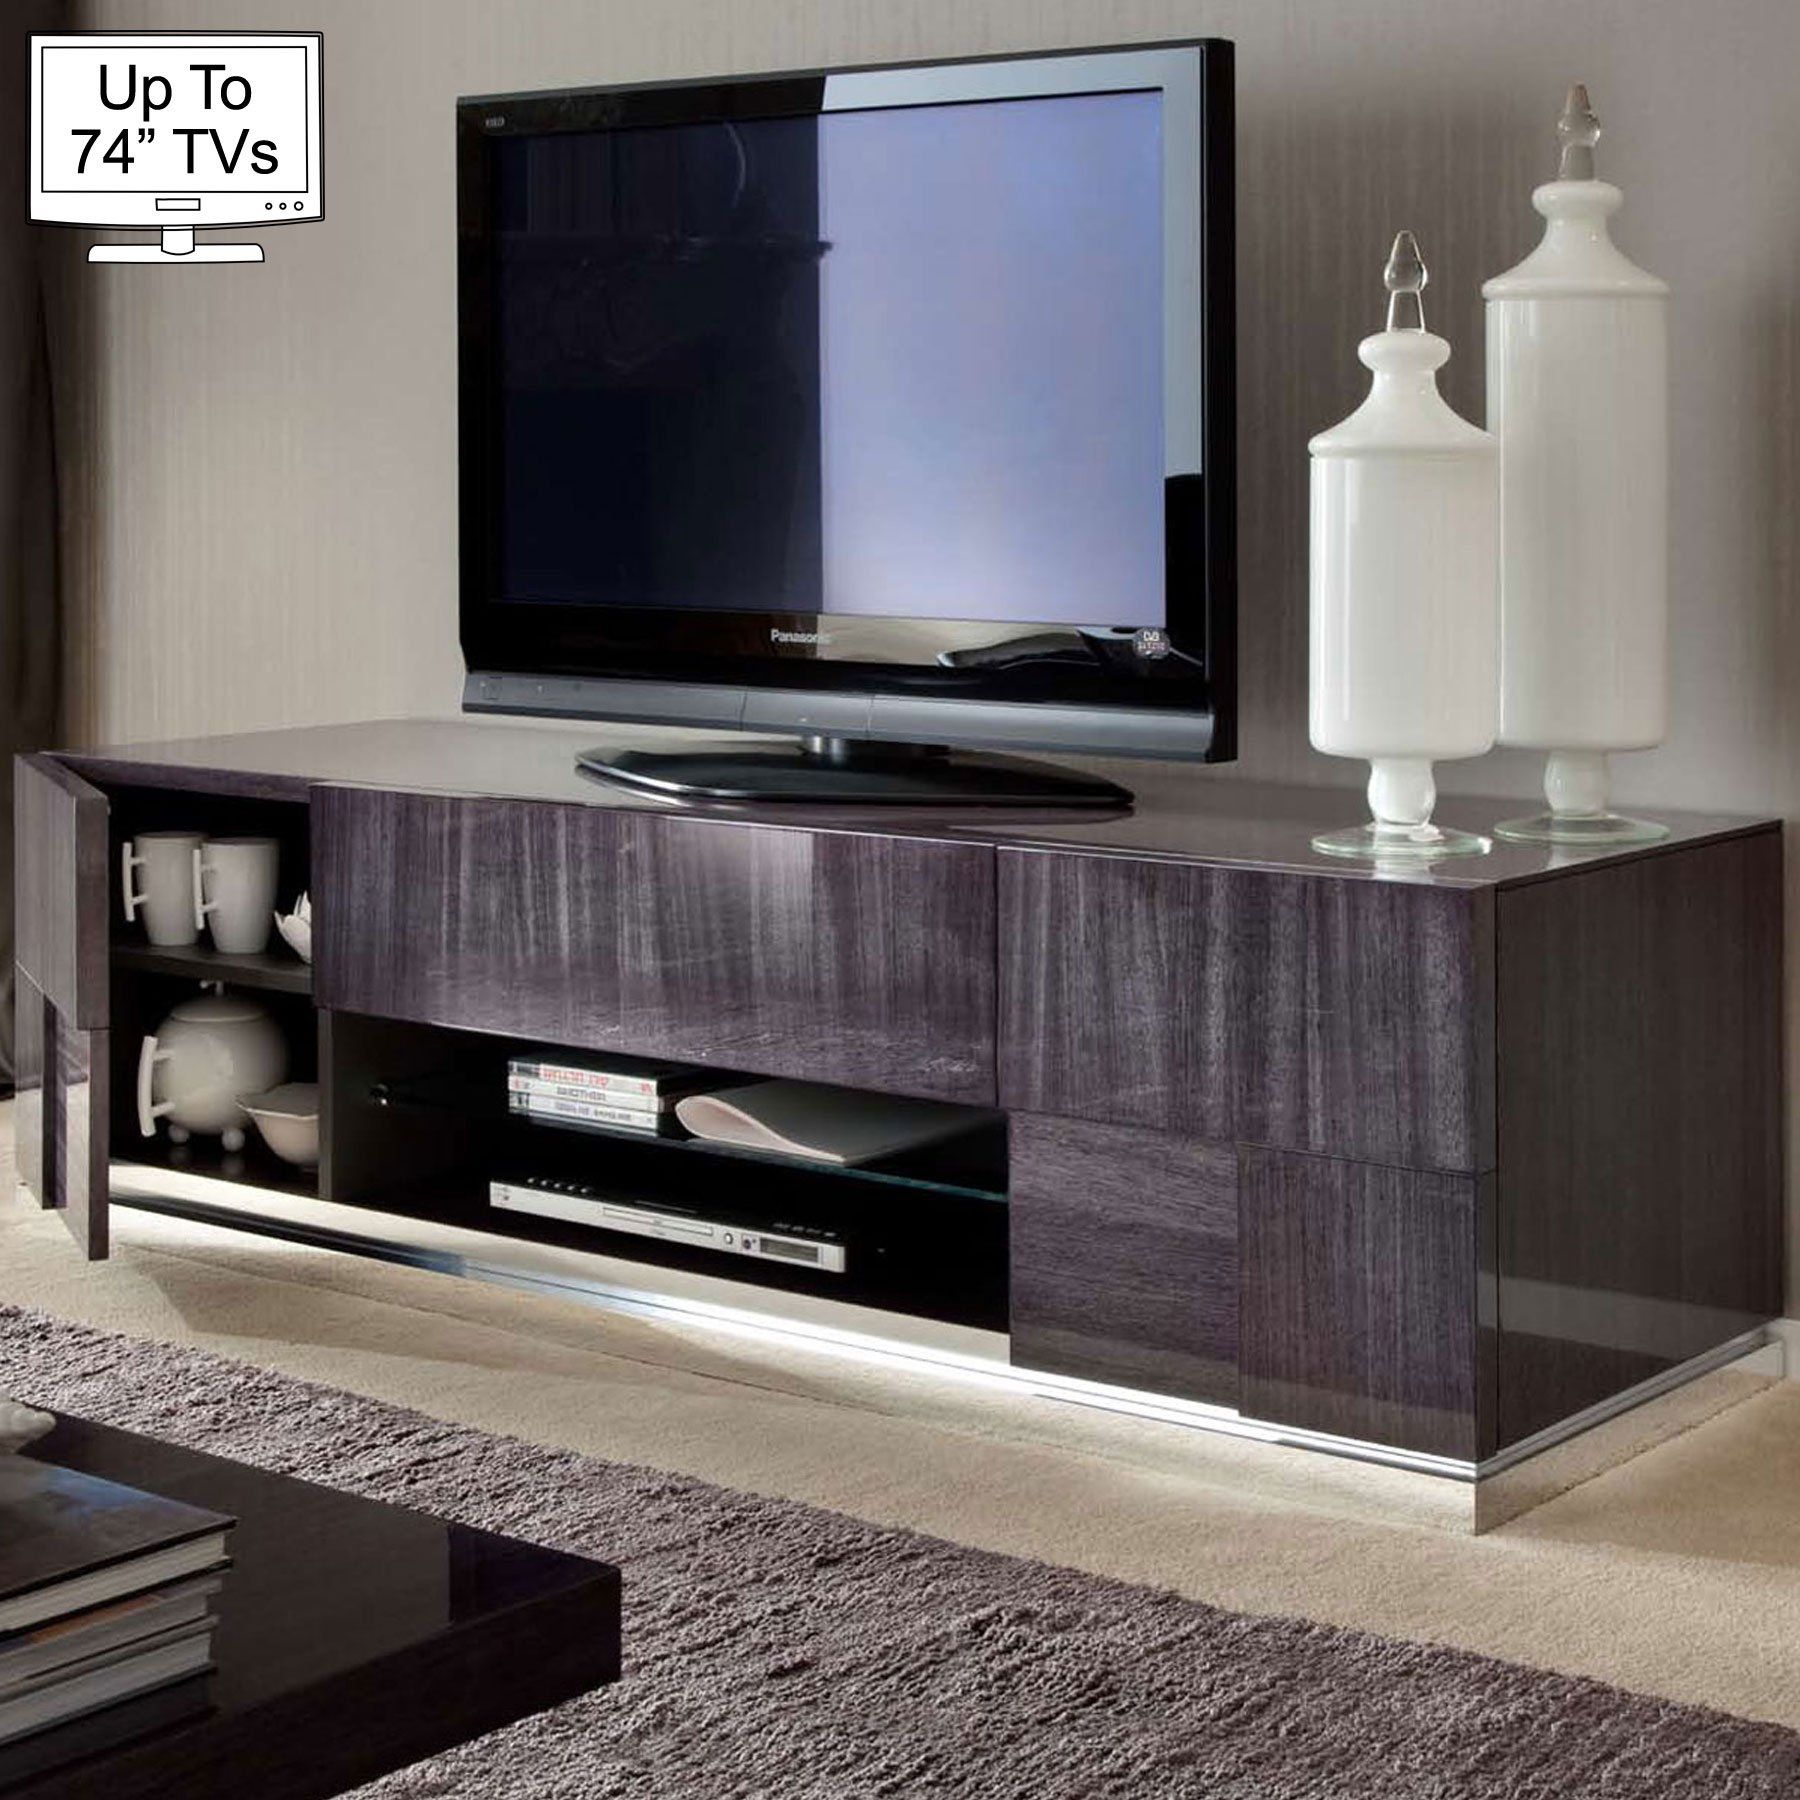 Monza High Gloss Tv Stand For Up To 74" Tvs Throughout Cafe Tv Stands With Storage (View 12 of 15)